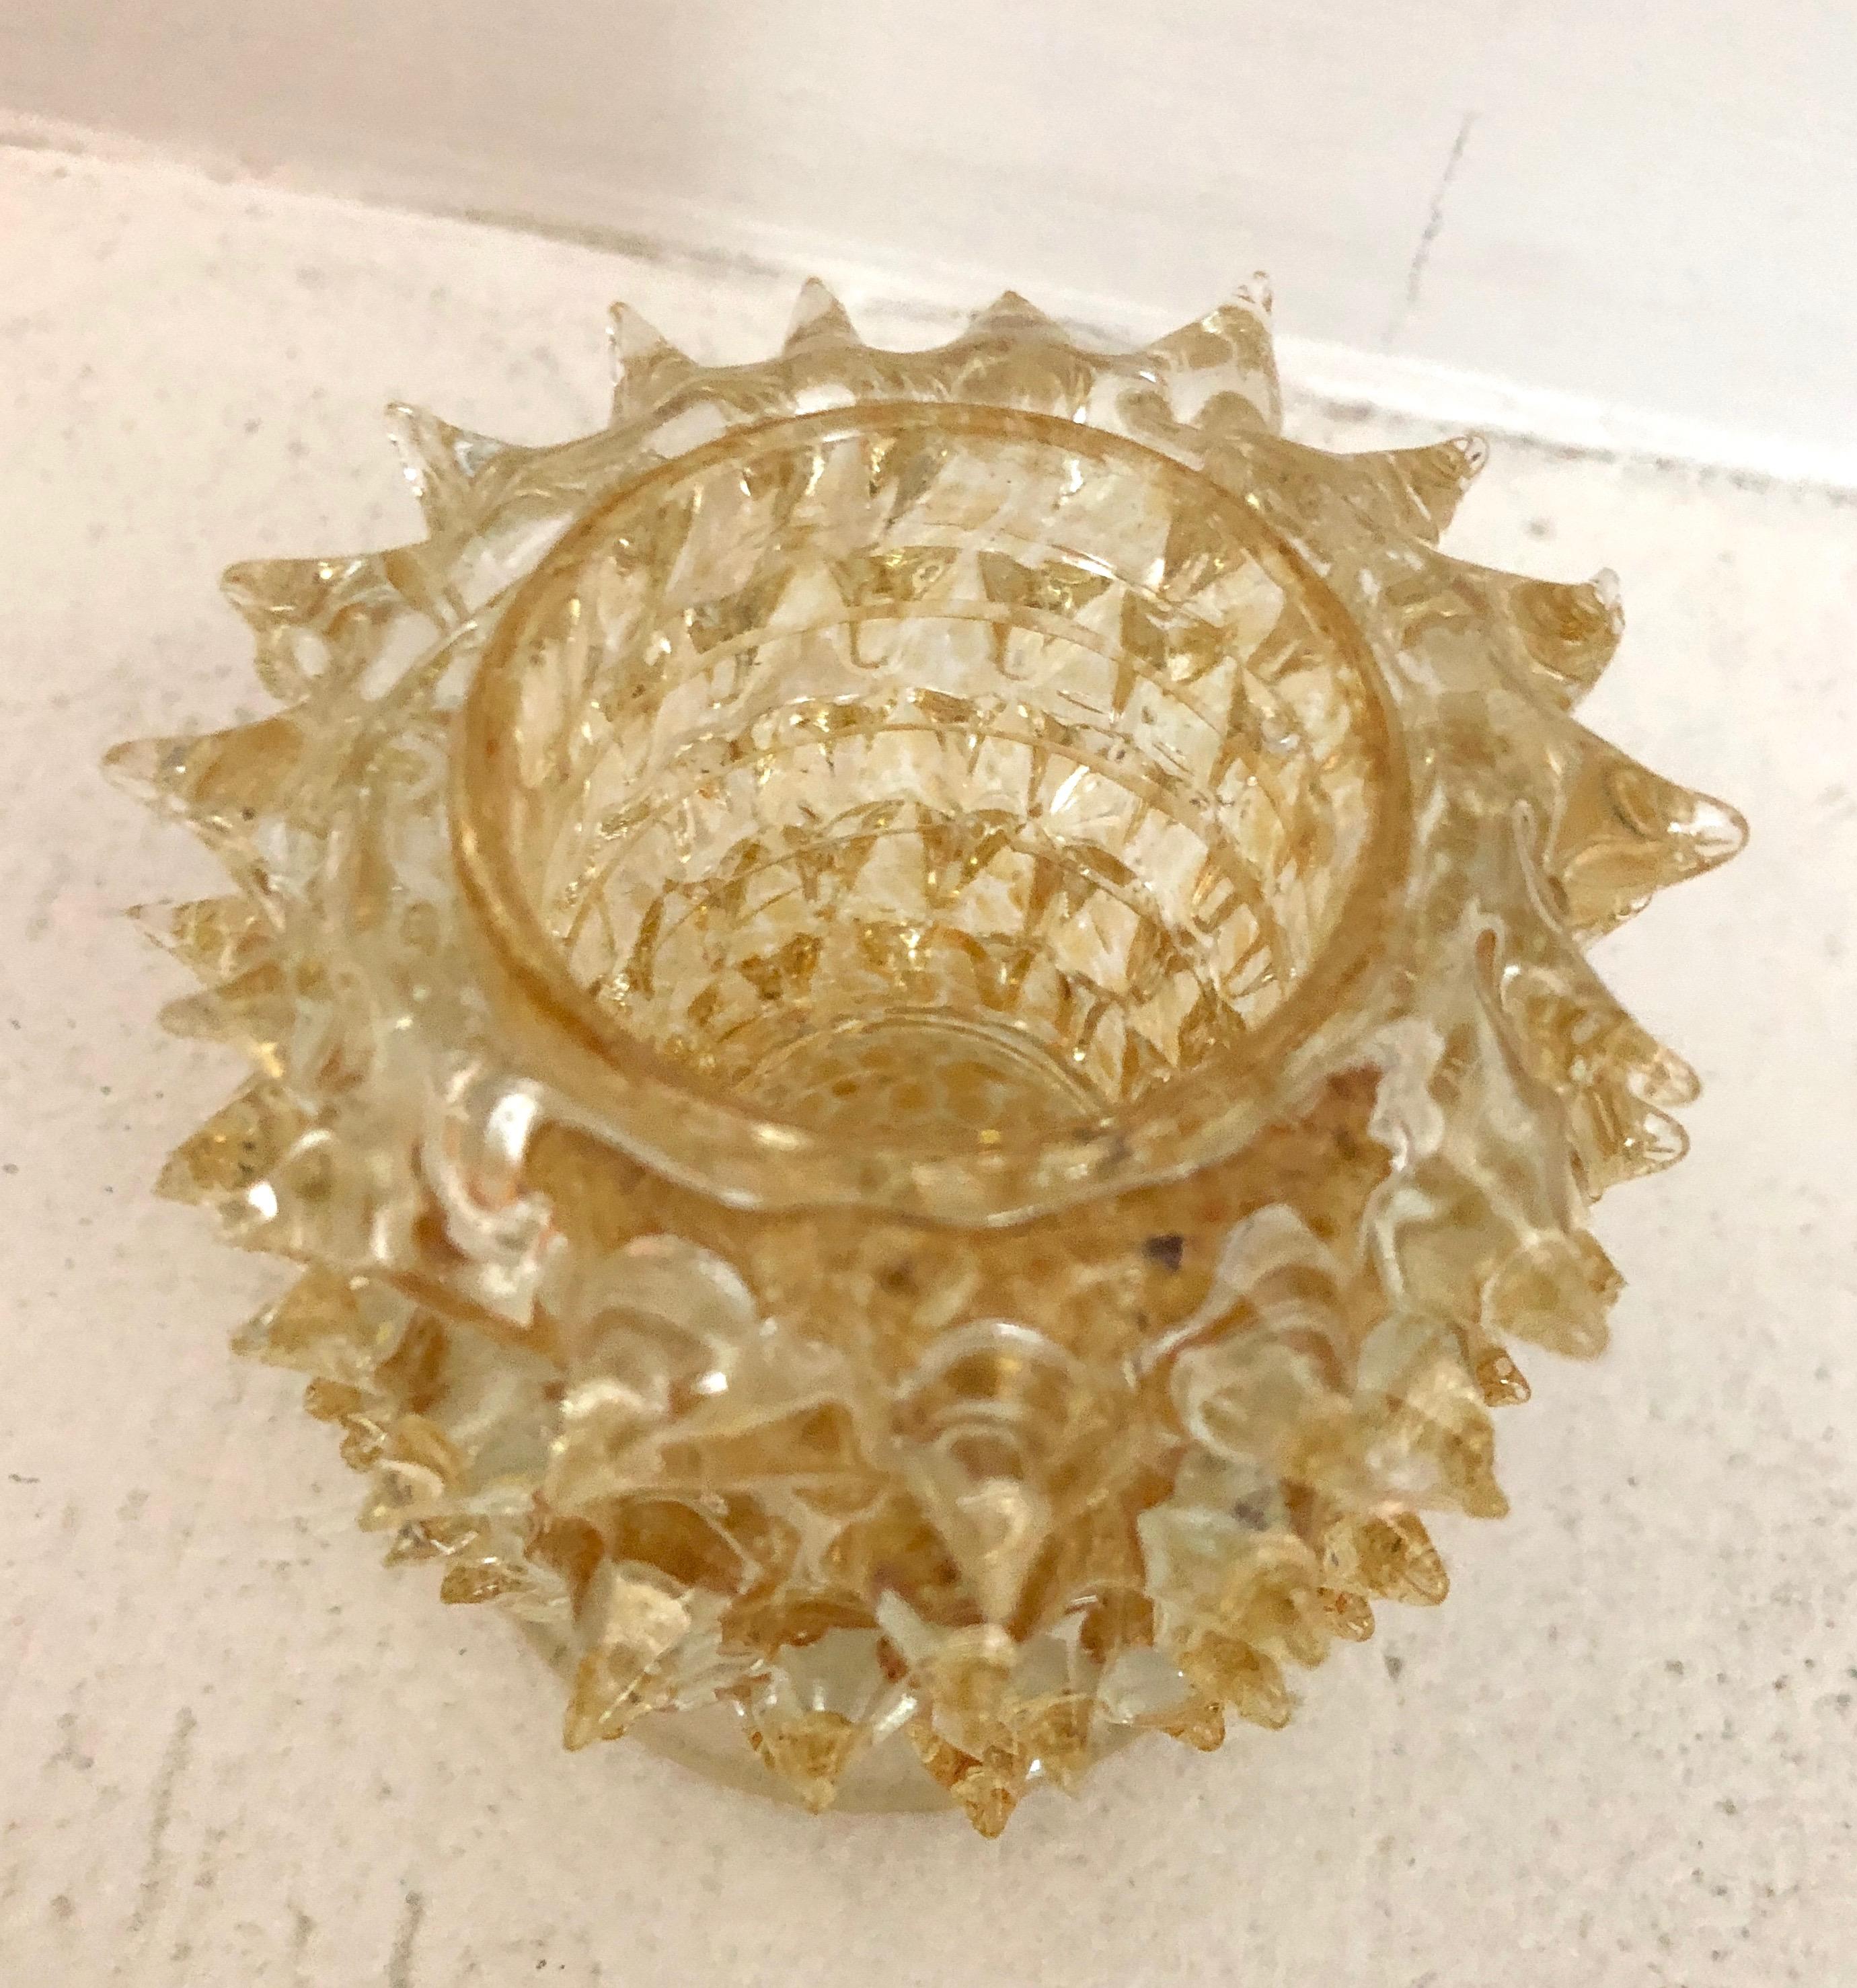 Italy, gold flecked aventurine glass, mould-blown with hand-worked spikes applied in molten state, for Ferro Barovier Toso, circa 1938.